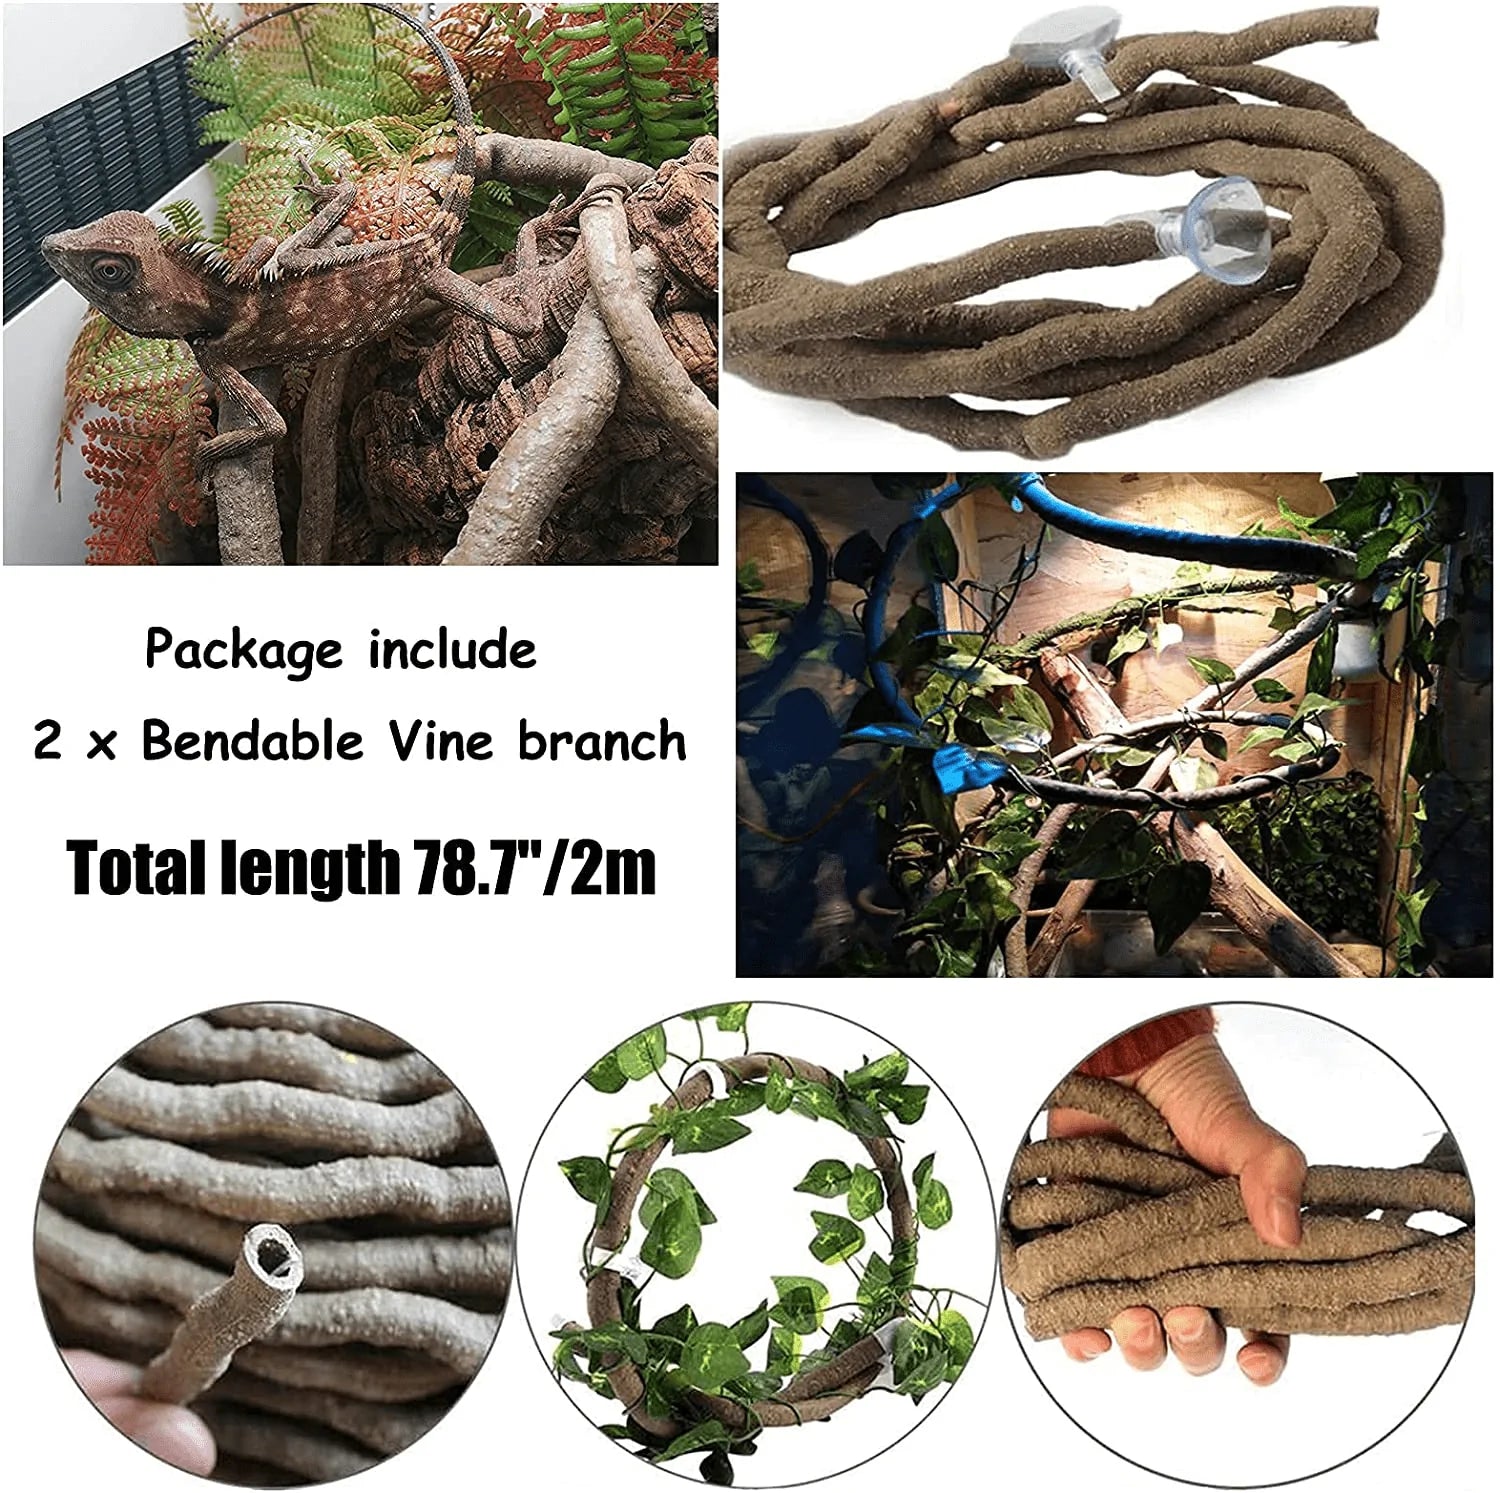 PINVNBY Reptile Hammock Lizard Lounger Reptile Mossy Cave Hide Bearded Dragon Hammock Climber Vines Flexible Leaves Amphibians Terrarium Decoration Accessories for Lizard Chameleon Turtle Frog Snake